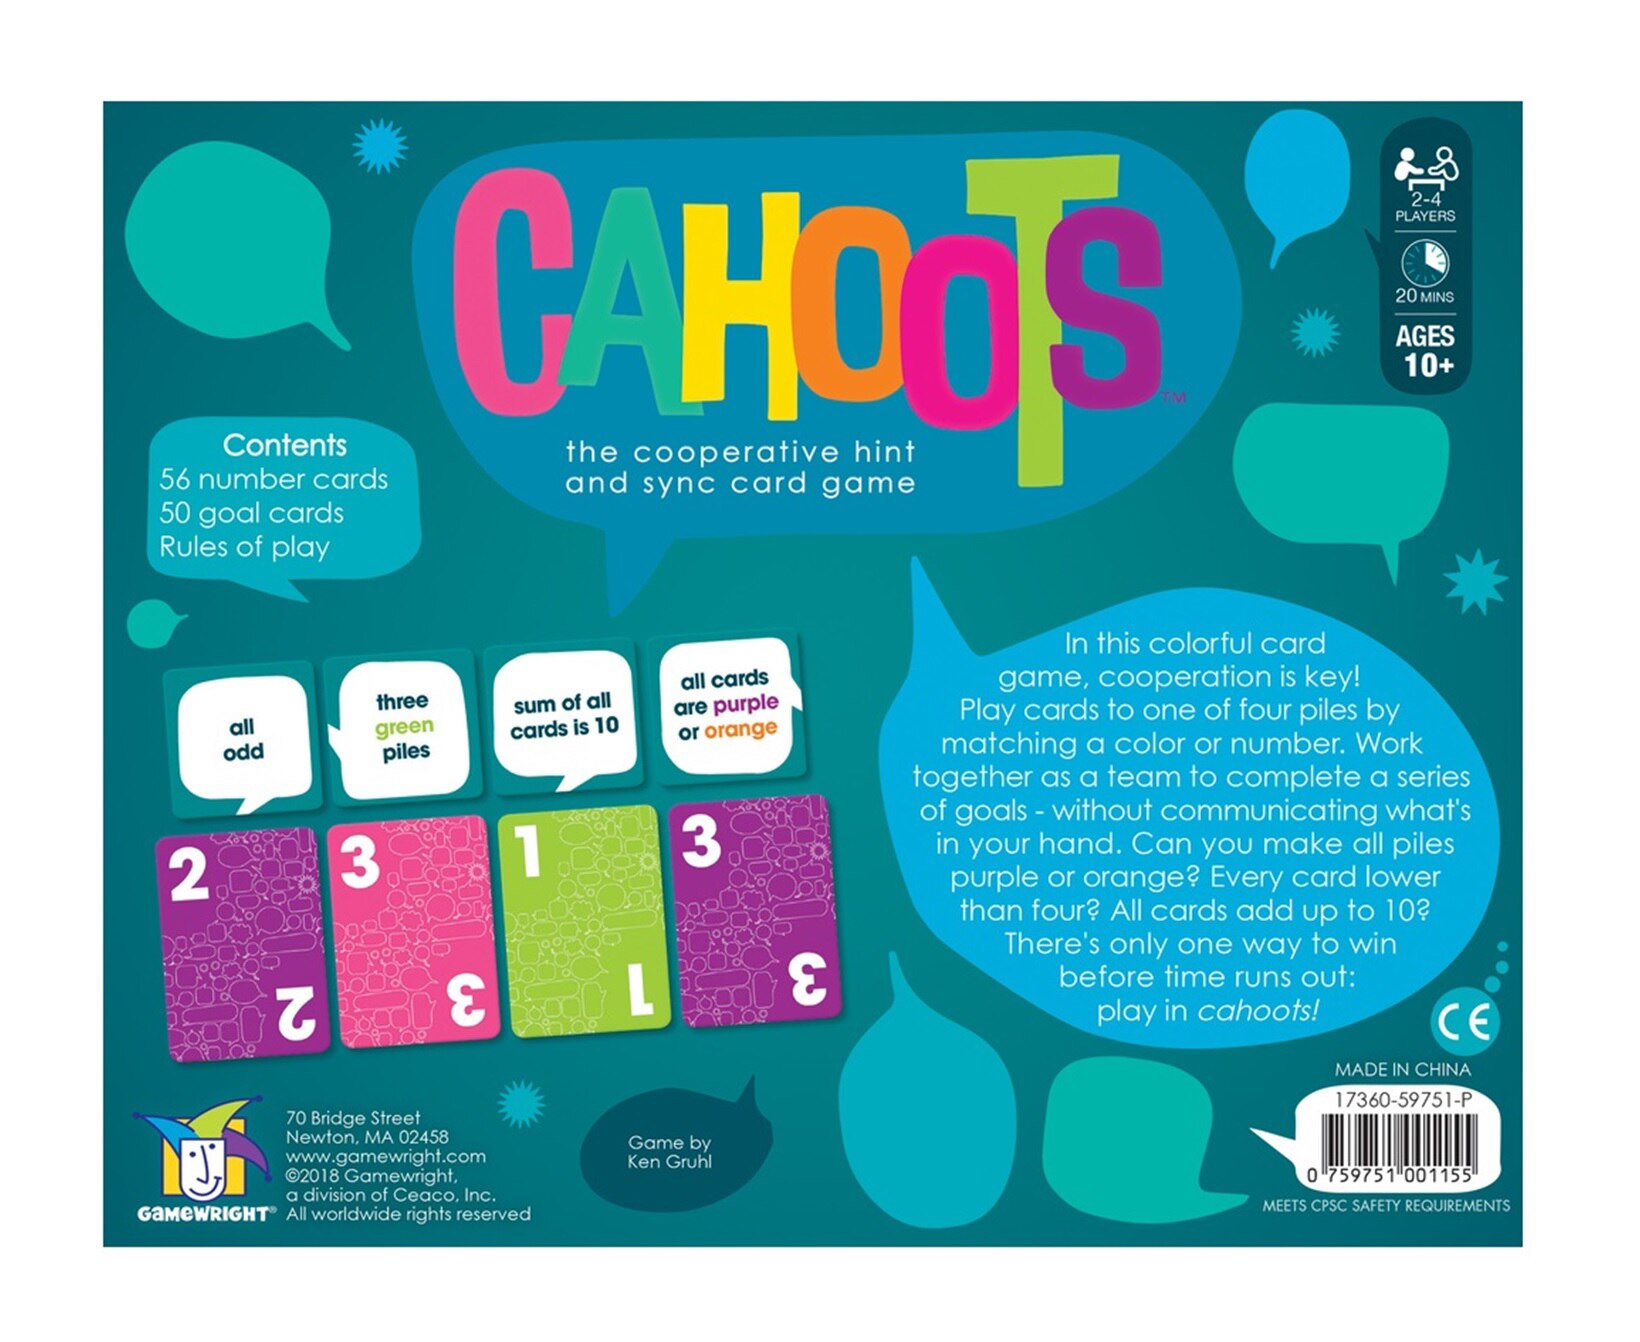 Gamewright Cahoots the Cooperative Hint and Sync Card Game 